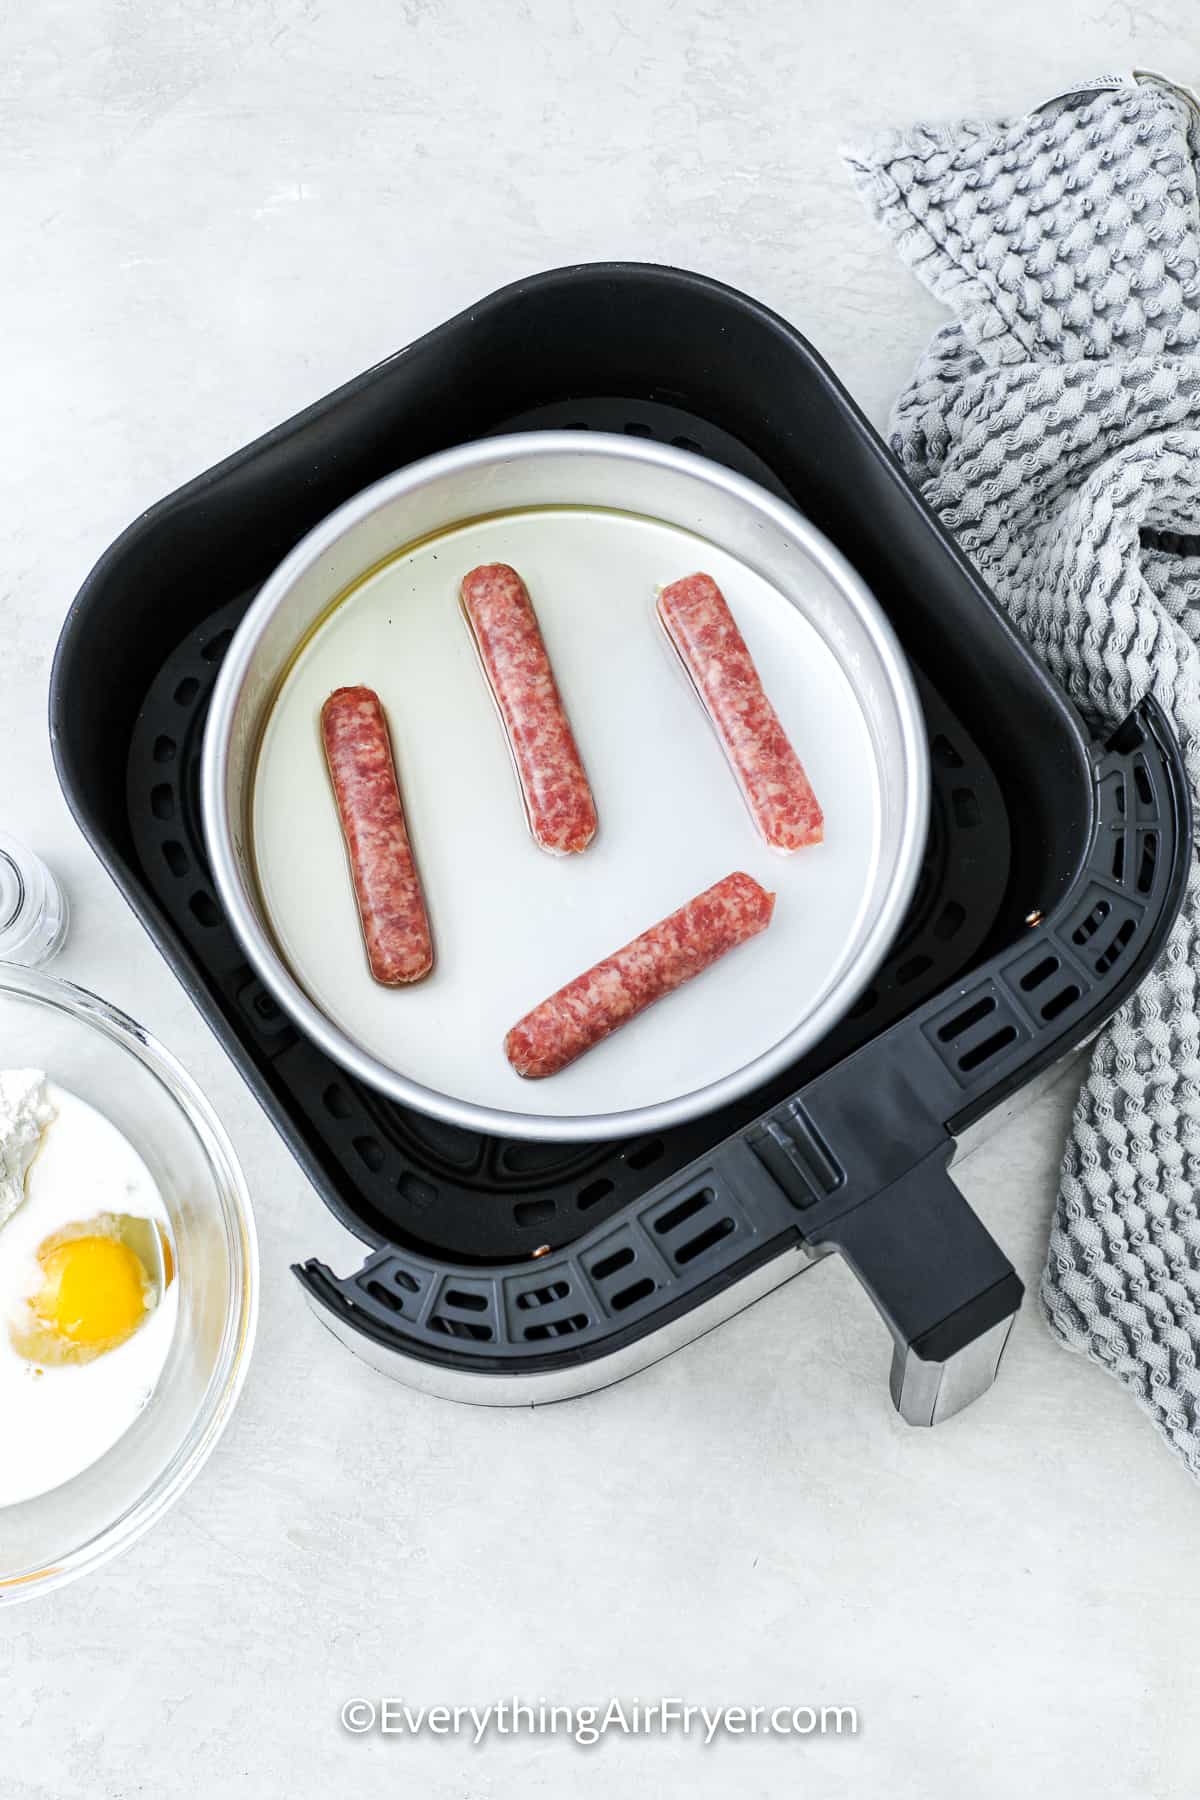 uncooked sausages in an air fryer tray